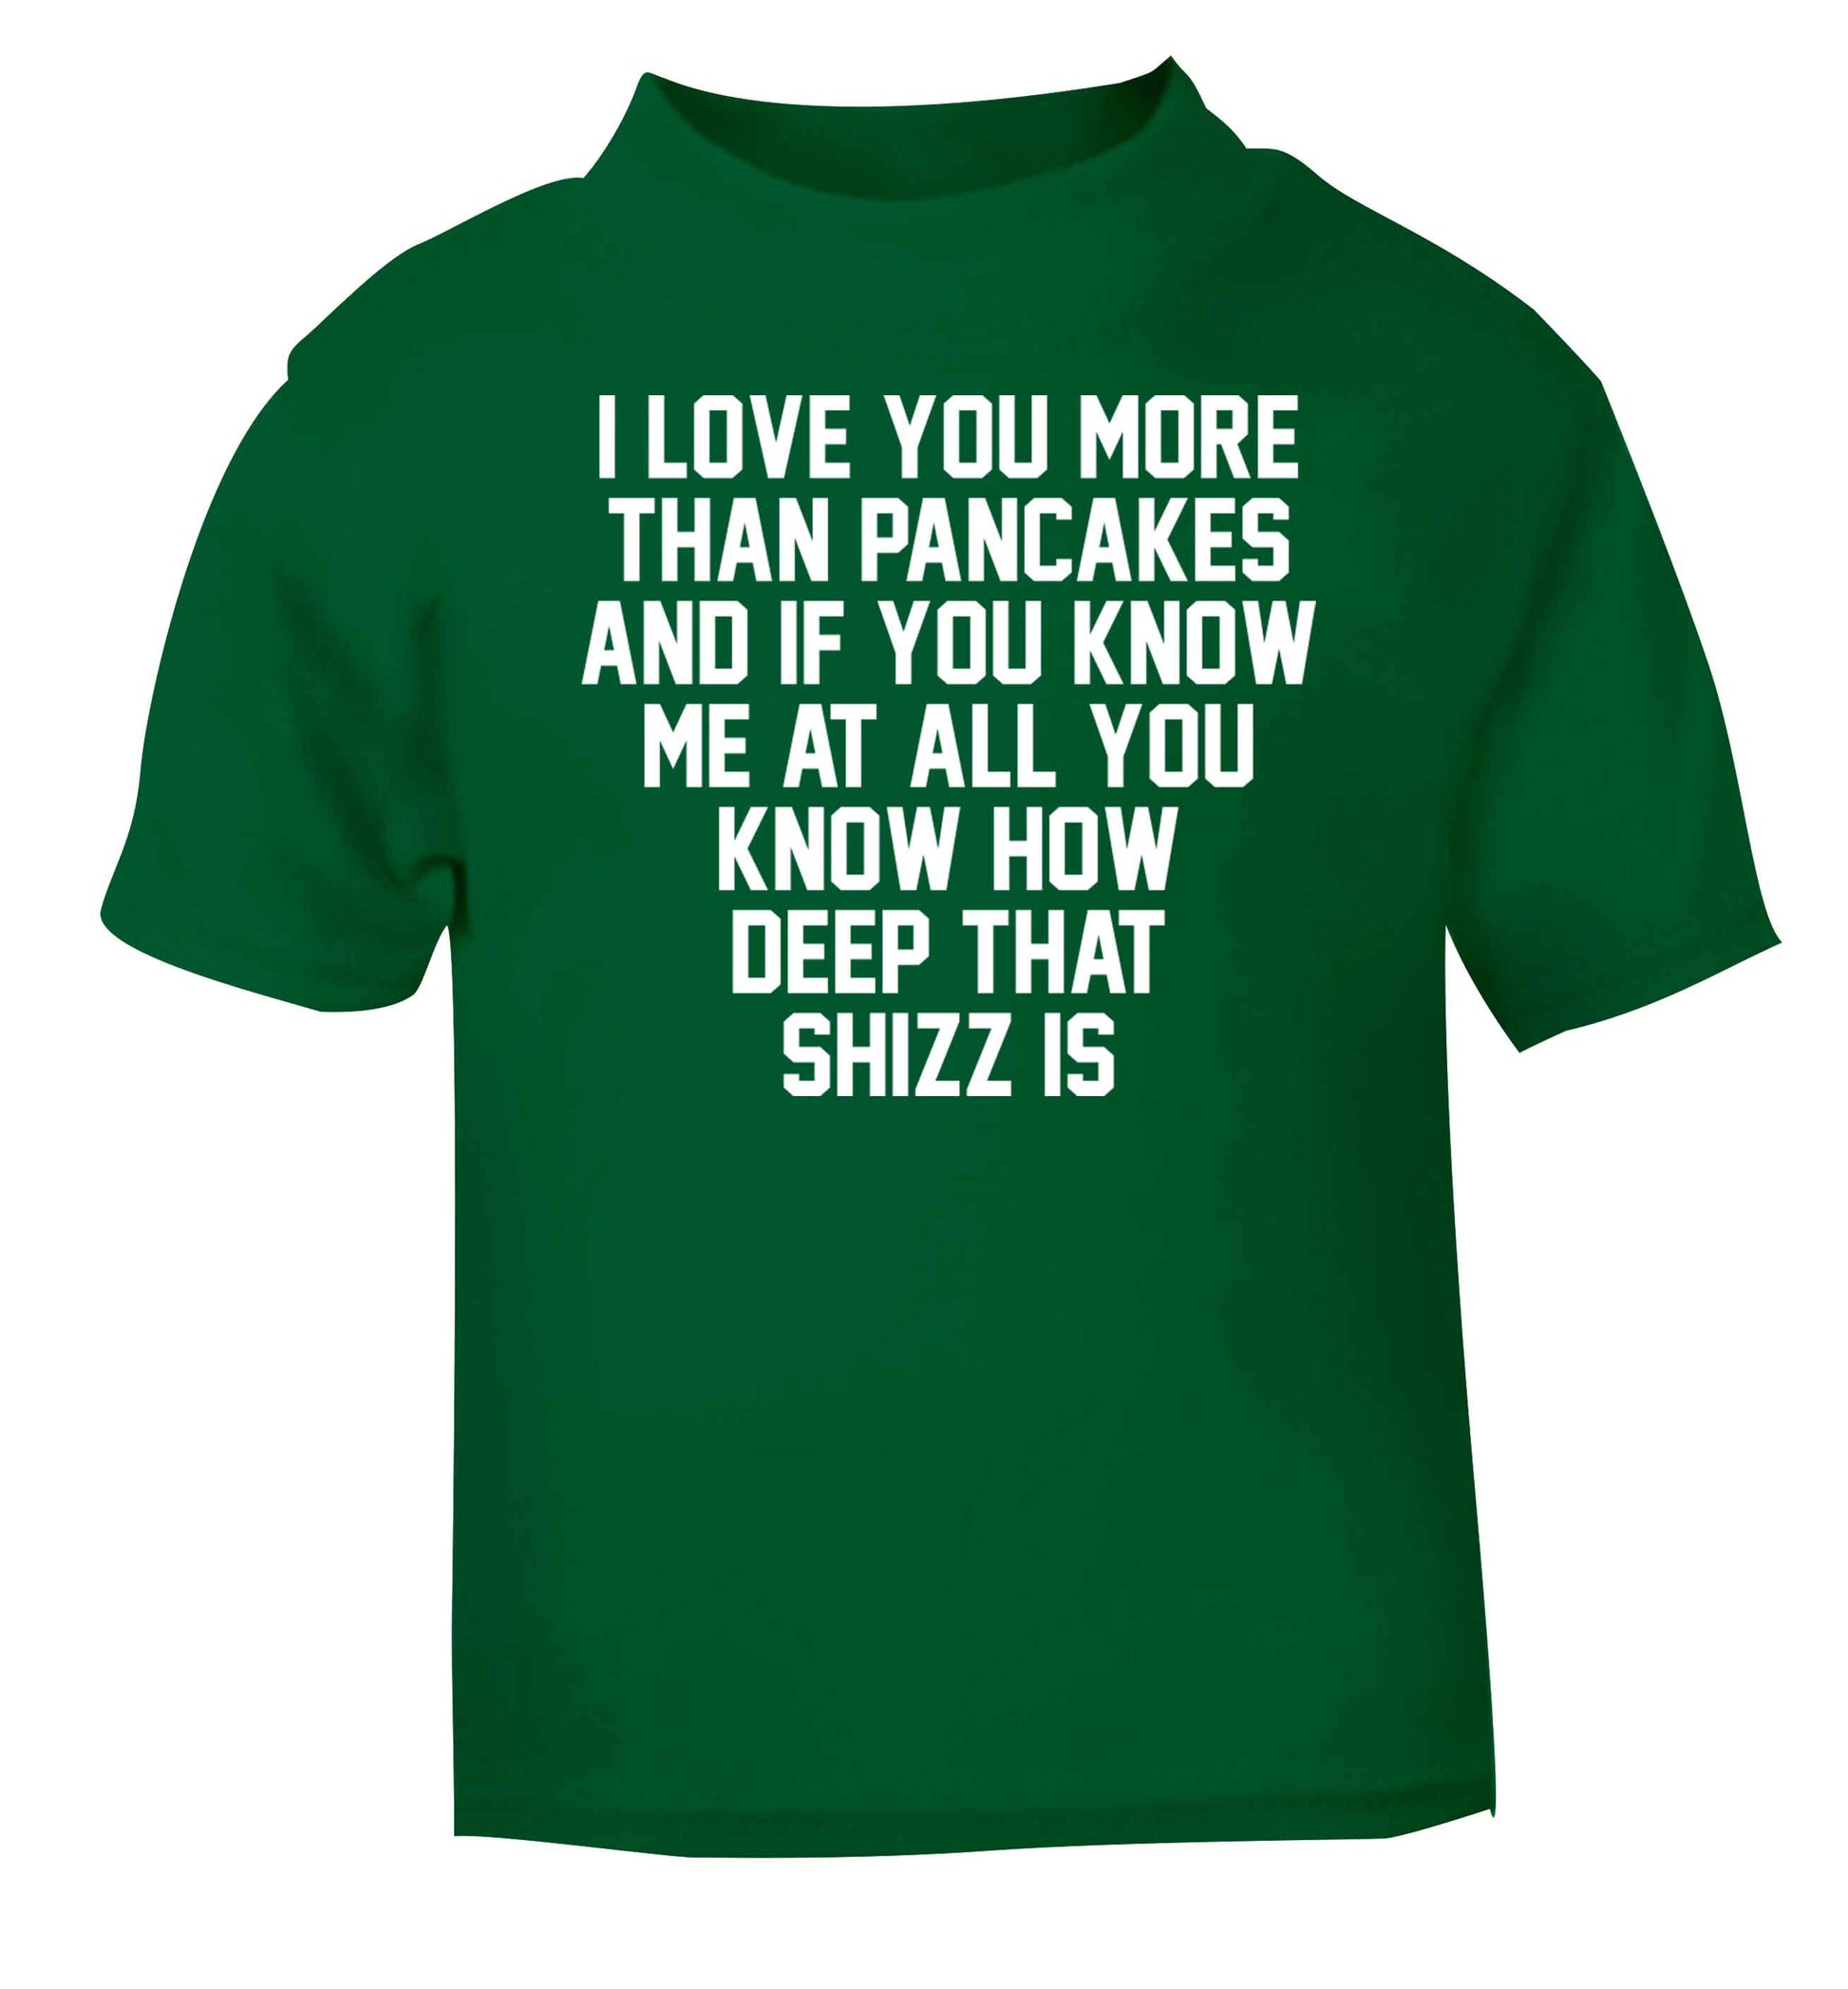 I love you more than pancakes and if you know me at all you know how deep that shizz is green baby toddler Tshirt 2 Years